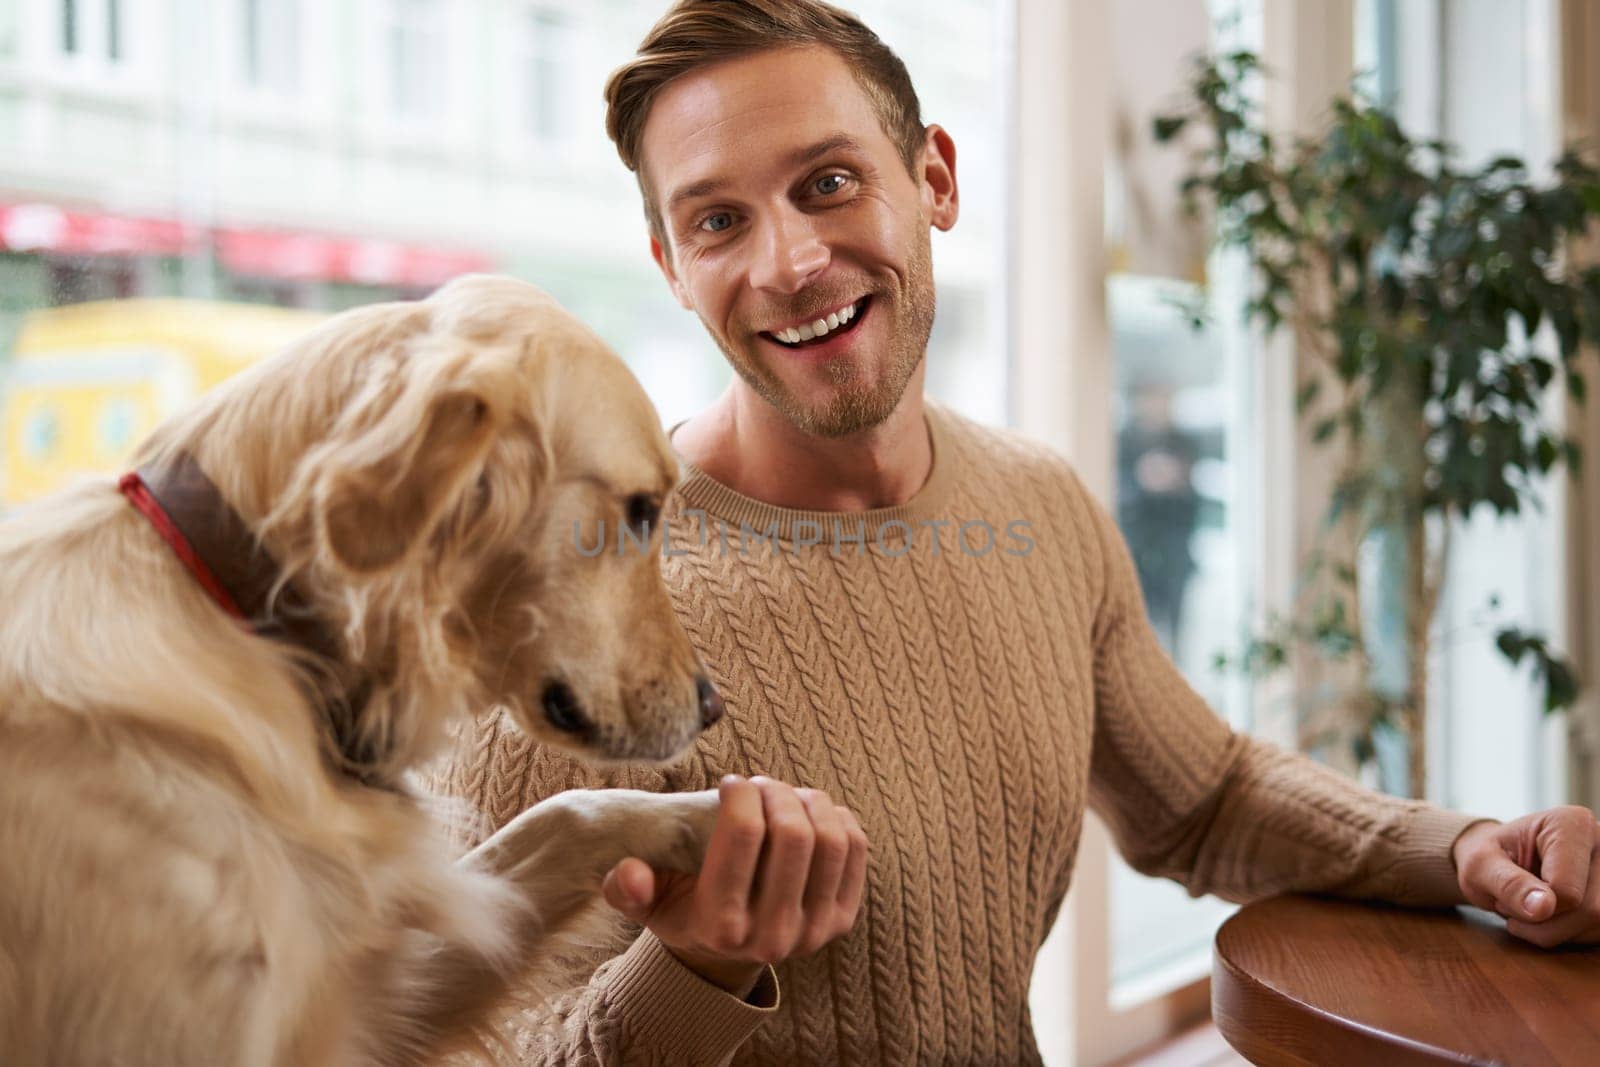 Smiling young man holds his dog paw in hand and looks happy. Concept of pet-friendly cafe and freelance co-working space.